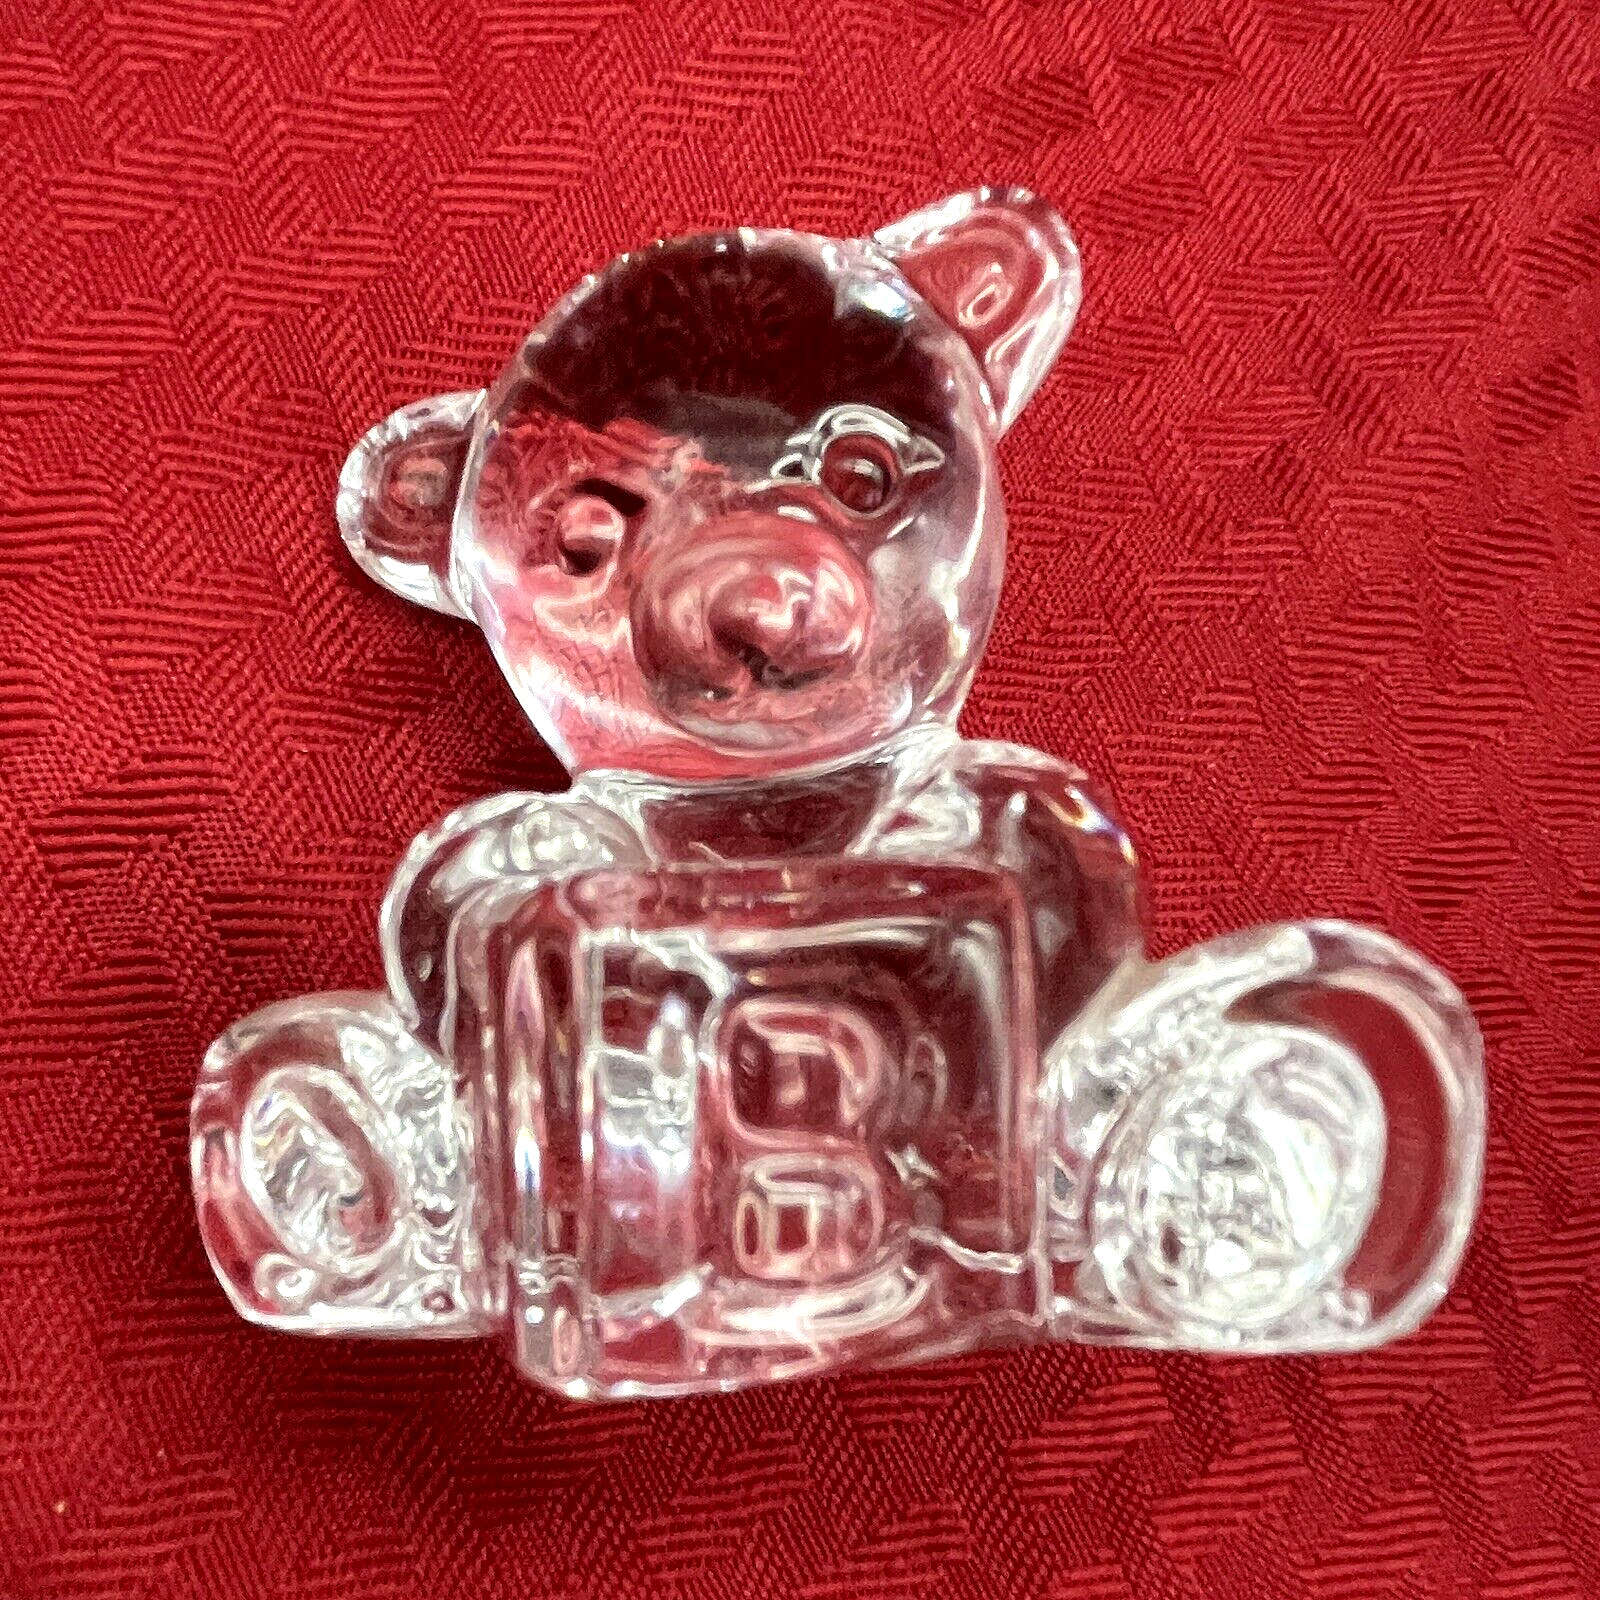 WATERFORD CRYSTAL BABY BEAR WITH A B C BLOCK